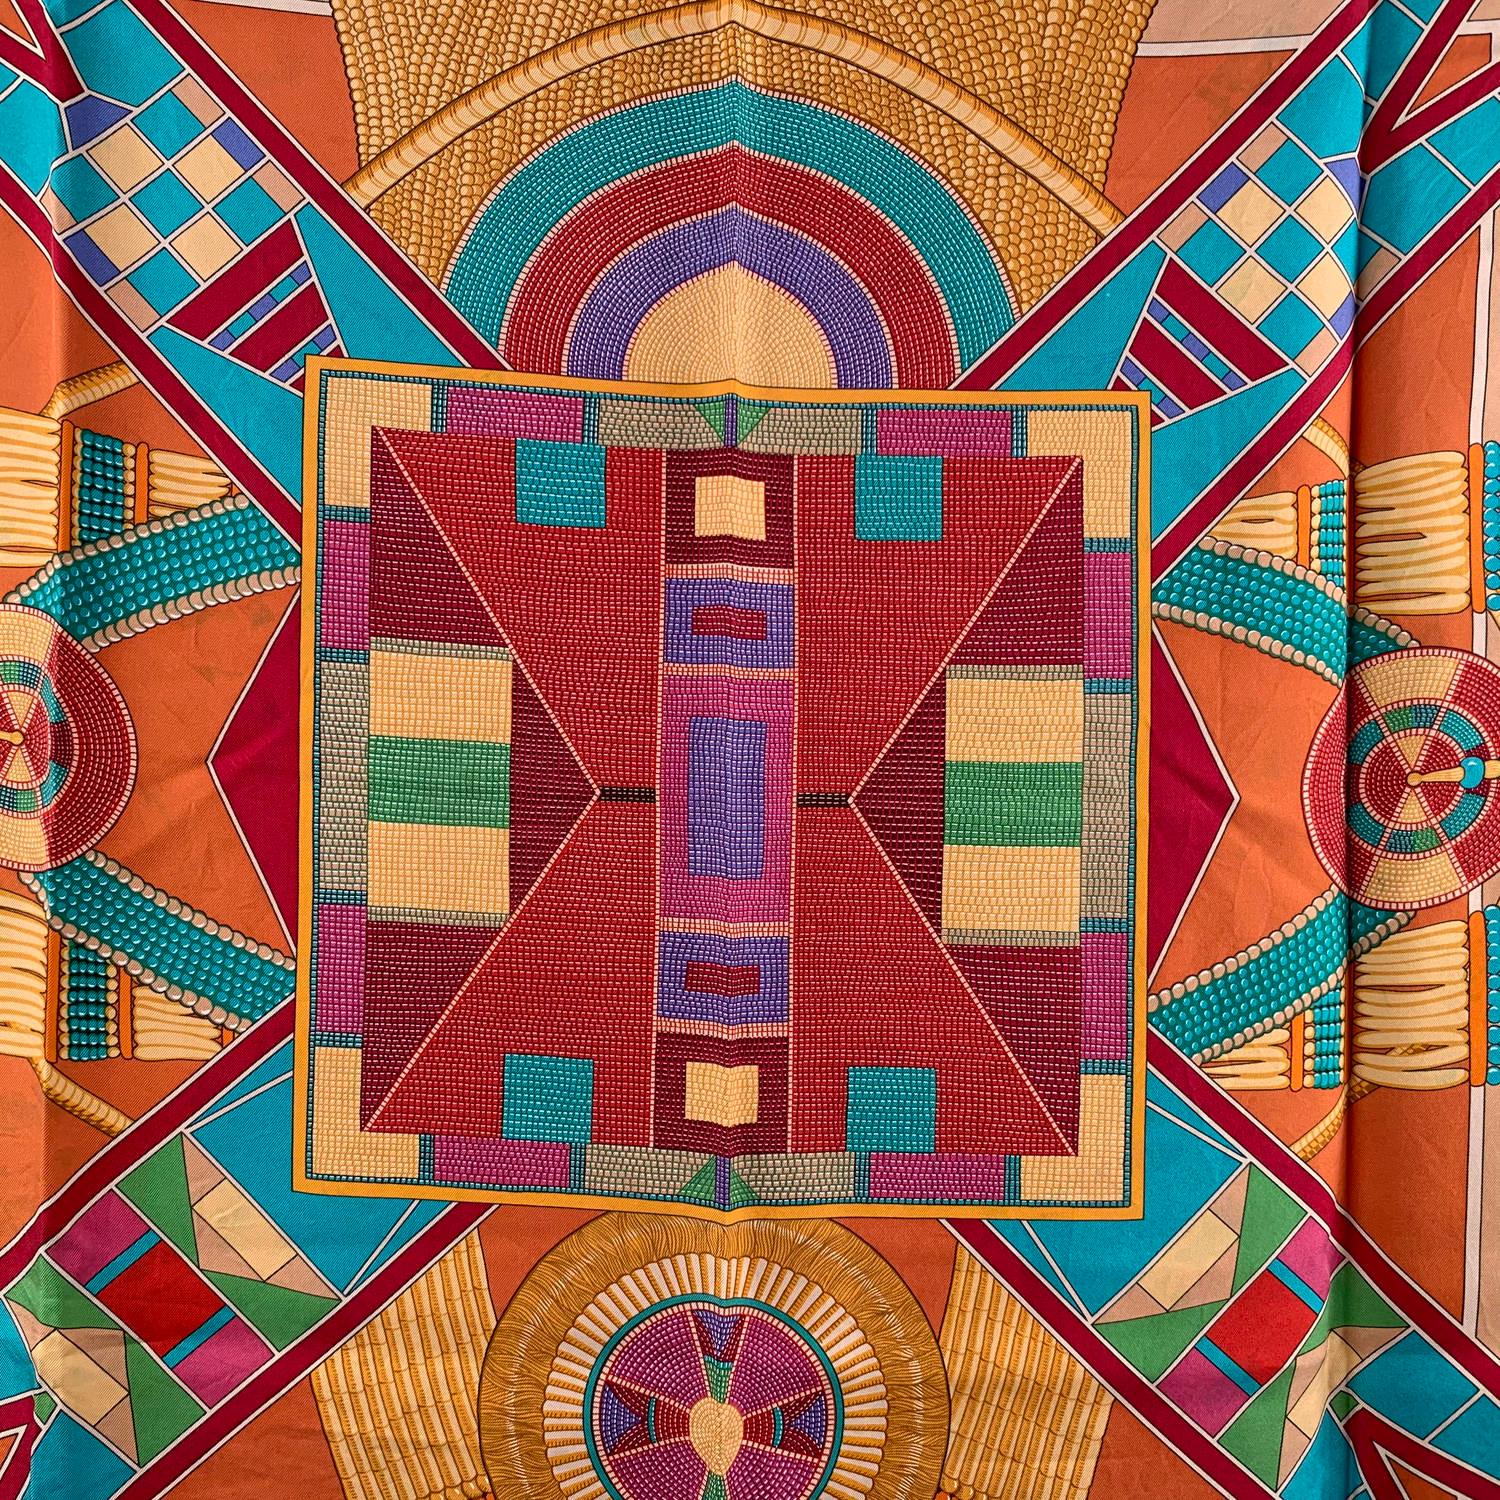 Hermes Multicolor Silk Scarf L'Art Indien Des Plaines 2004 Sophie Koechlin

HERMES multicolor Silk scarf 'L'Art Indien des Plaines' (the art of the Plains Indians), designed by Sophie Koechlin and issued in 2004 and 2011. 100% silk.  the design